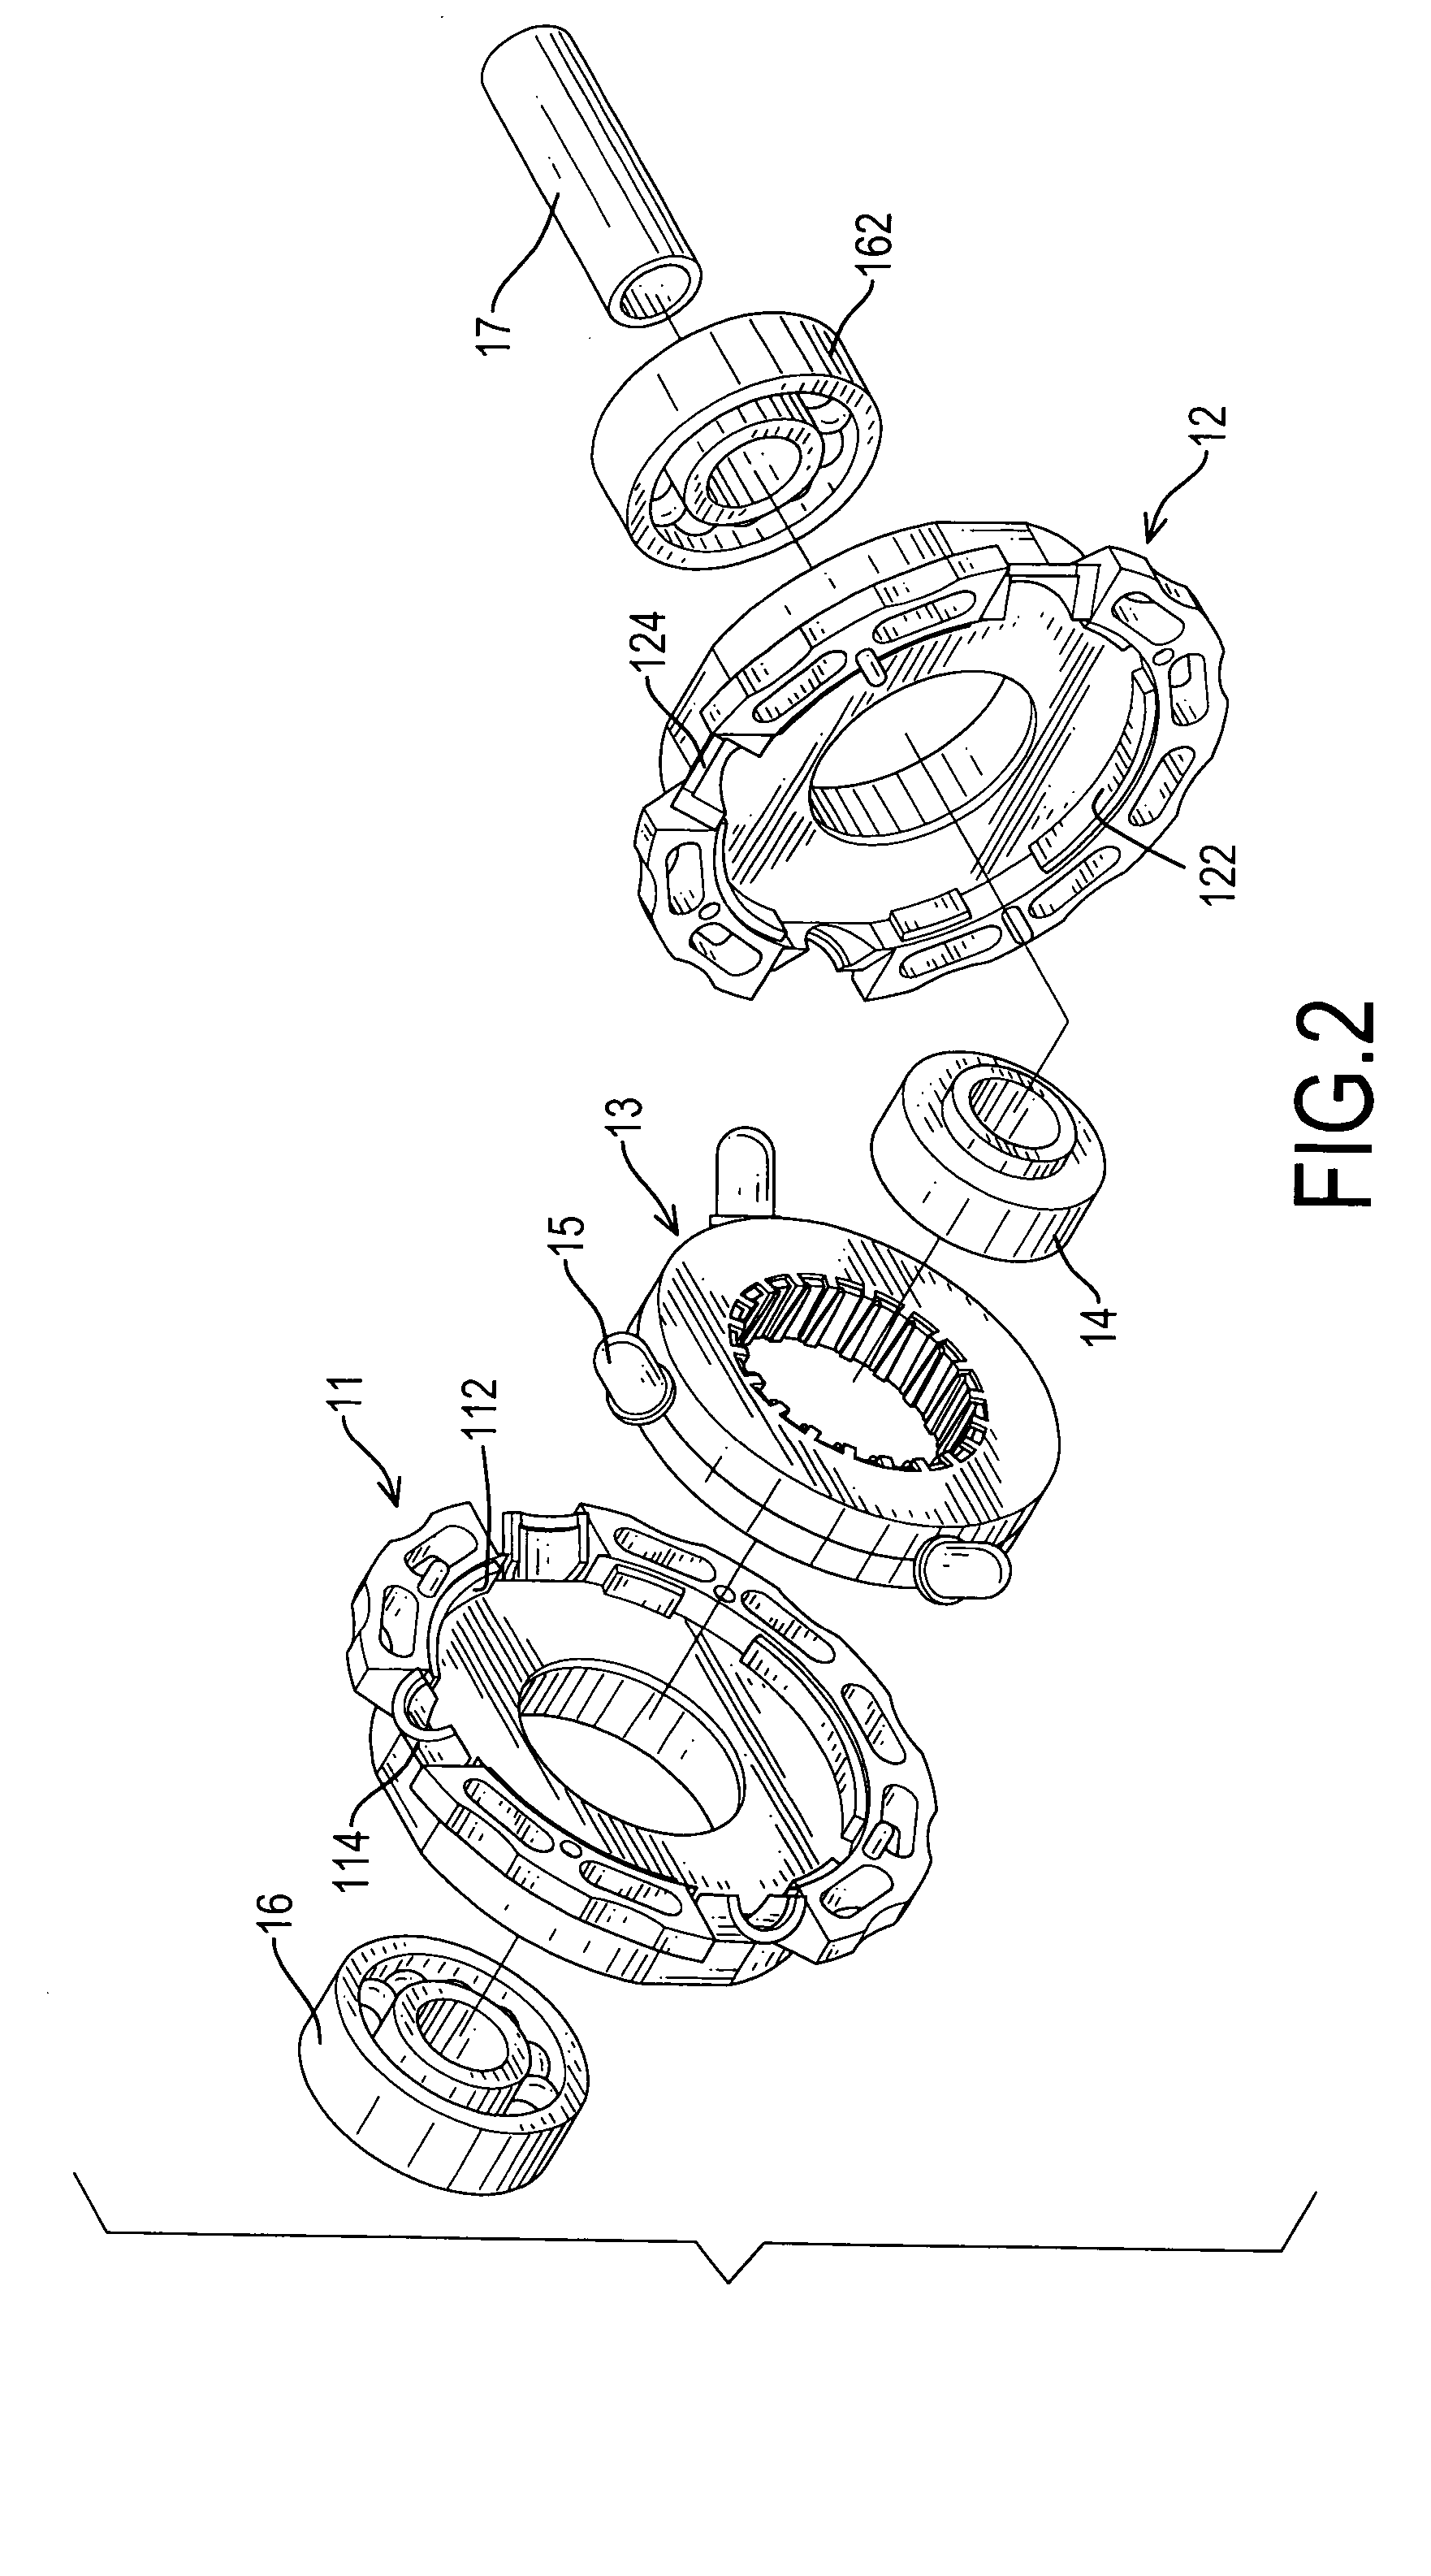 Skate wheel having skew-mounted and self-powered illuminating devices